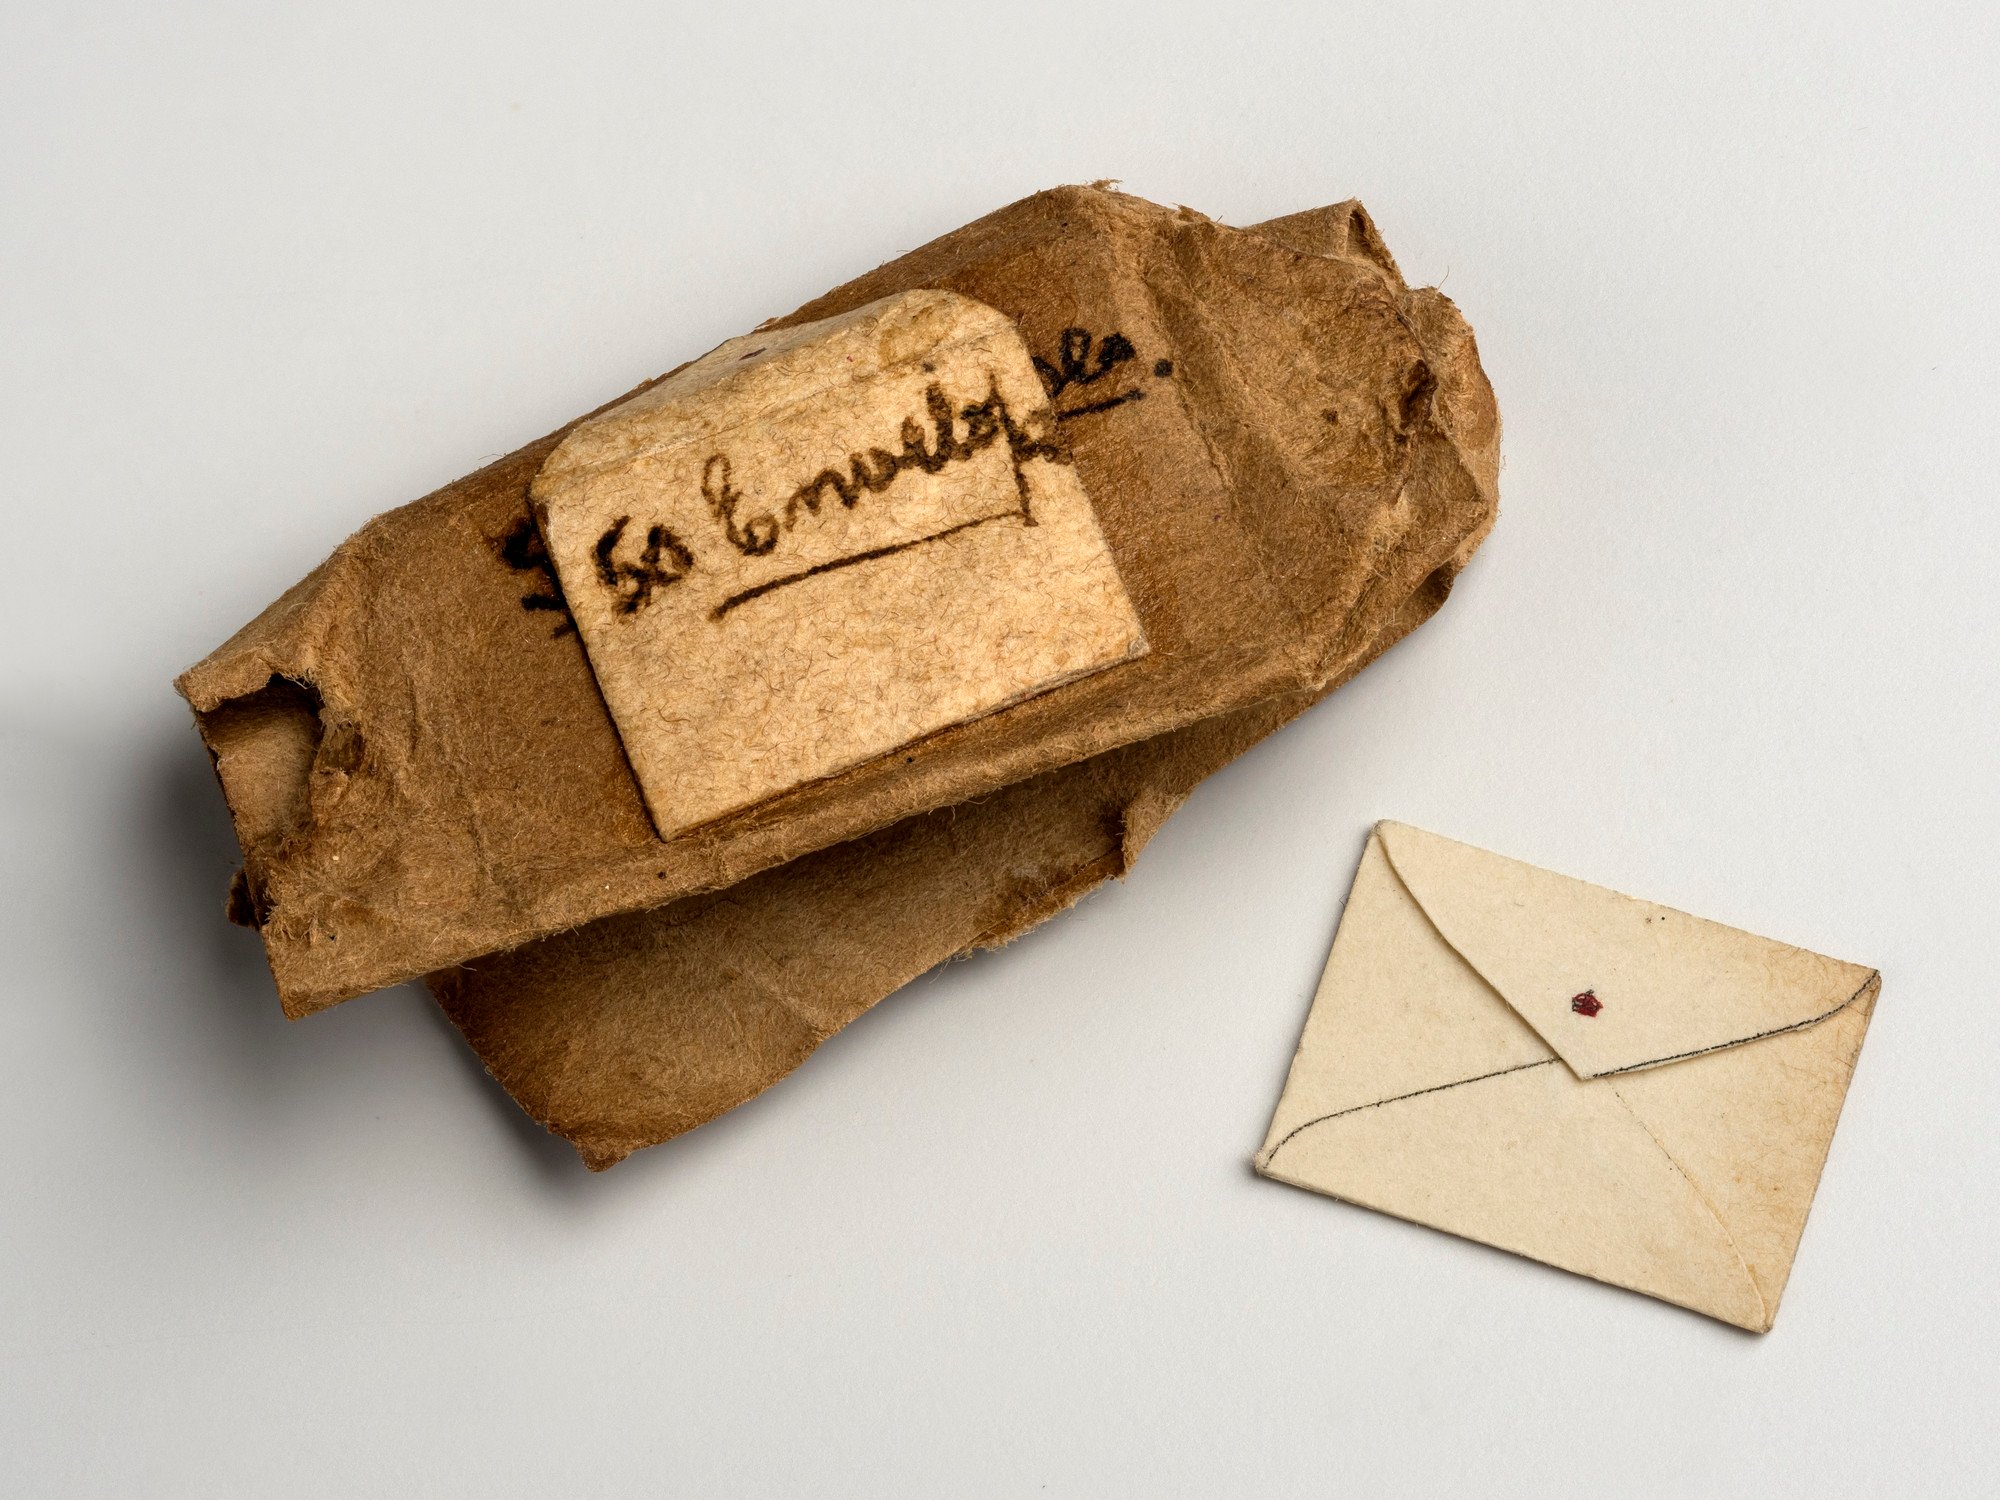 Miniature brown paper package containing envelopes with red crown on flap. Package has been opened. Some envelopes are loose.